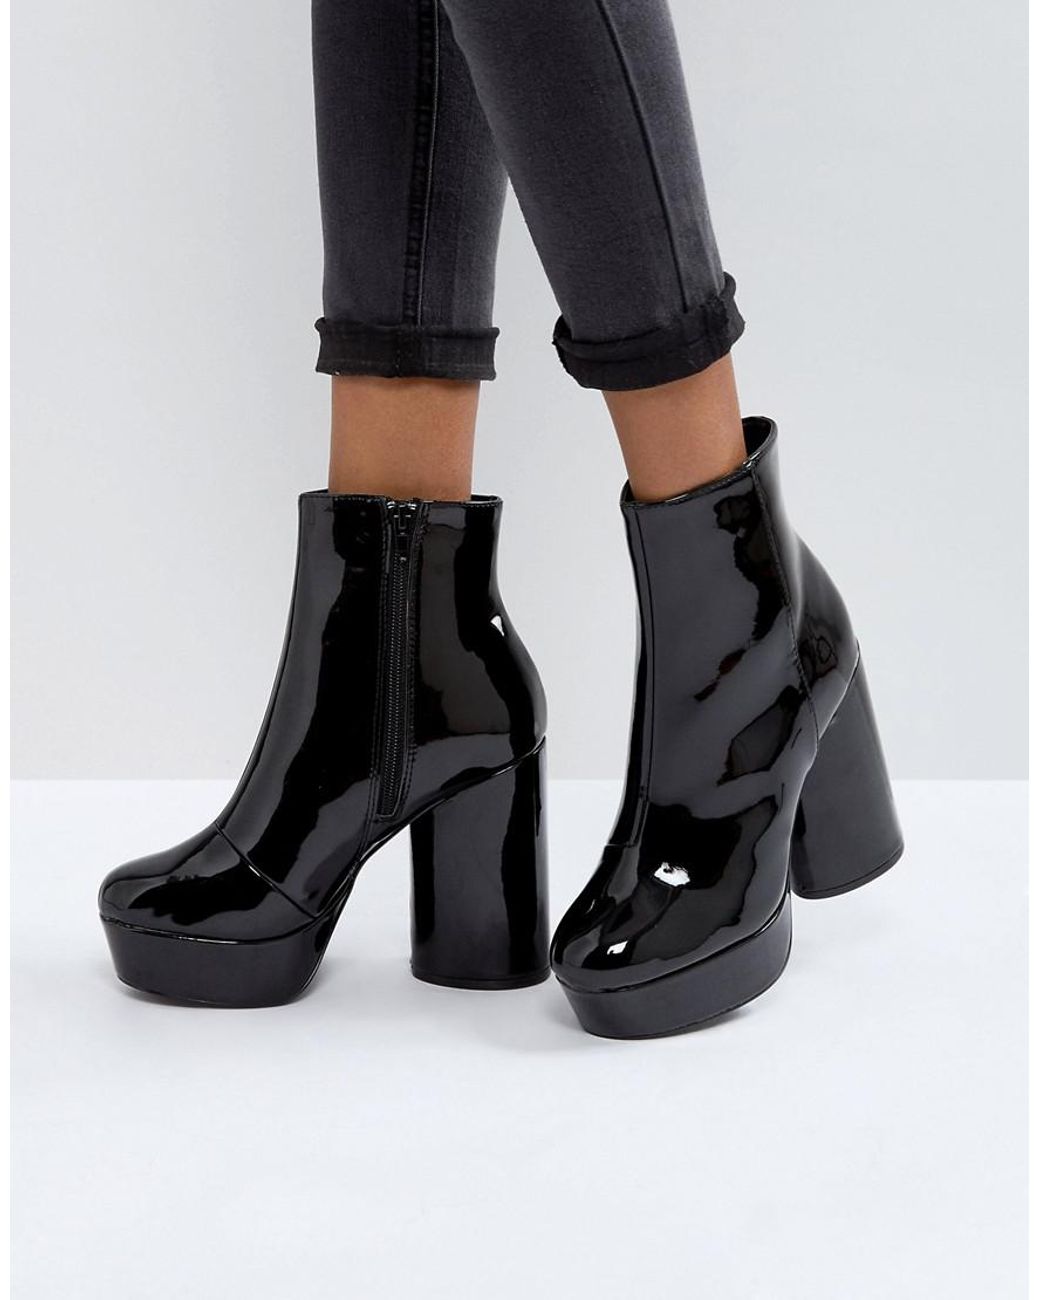 Call It Spring Crini Patent Platform Boots in Black | Lyst